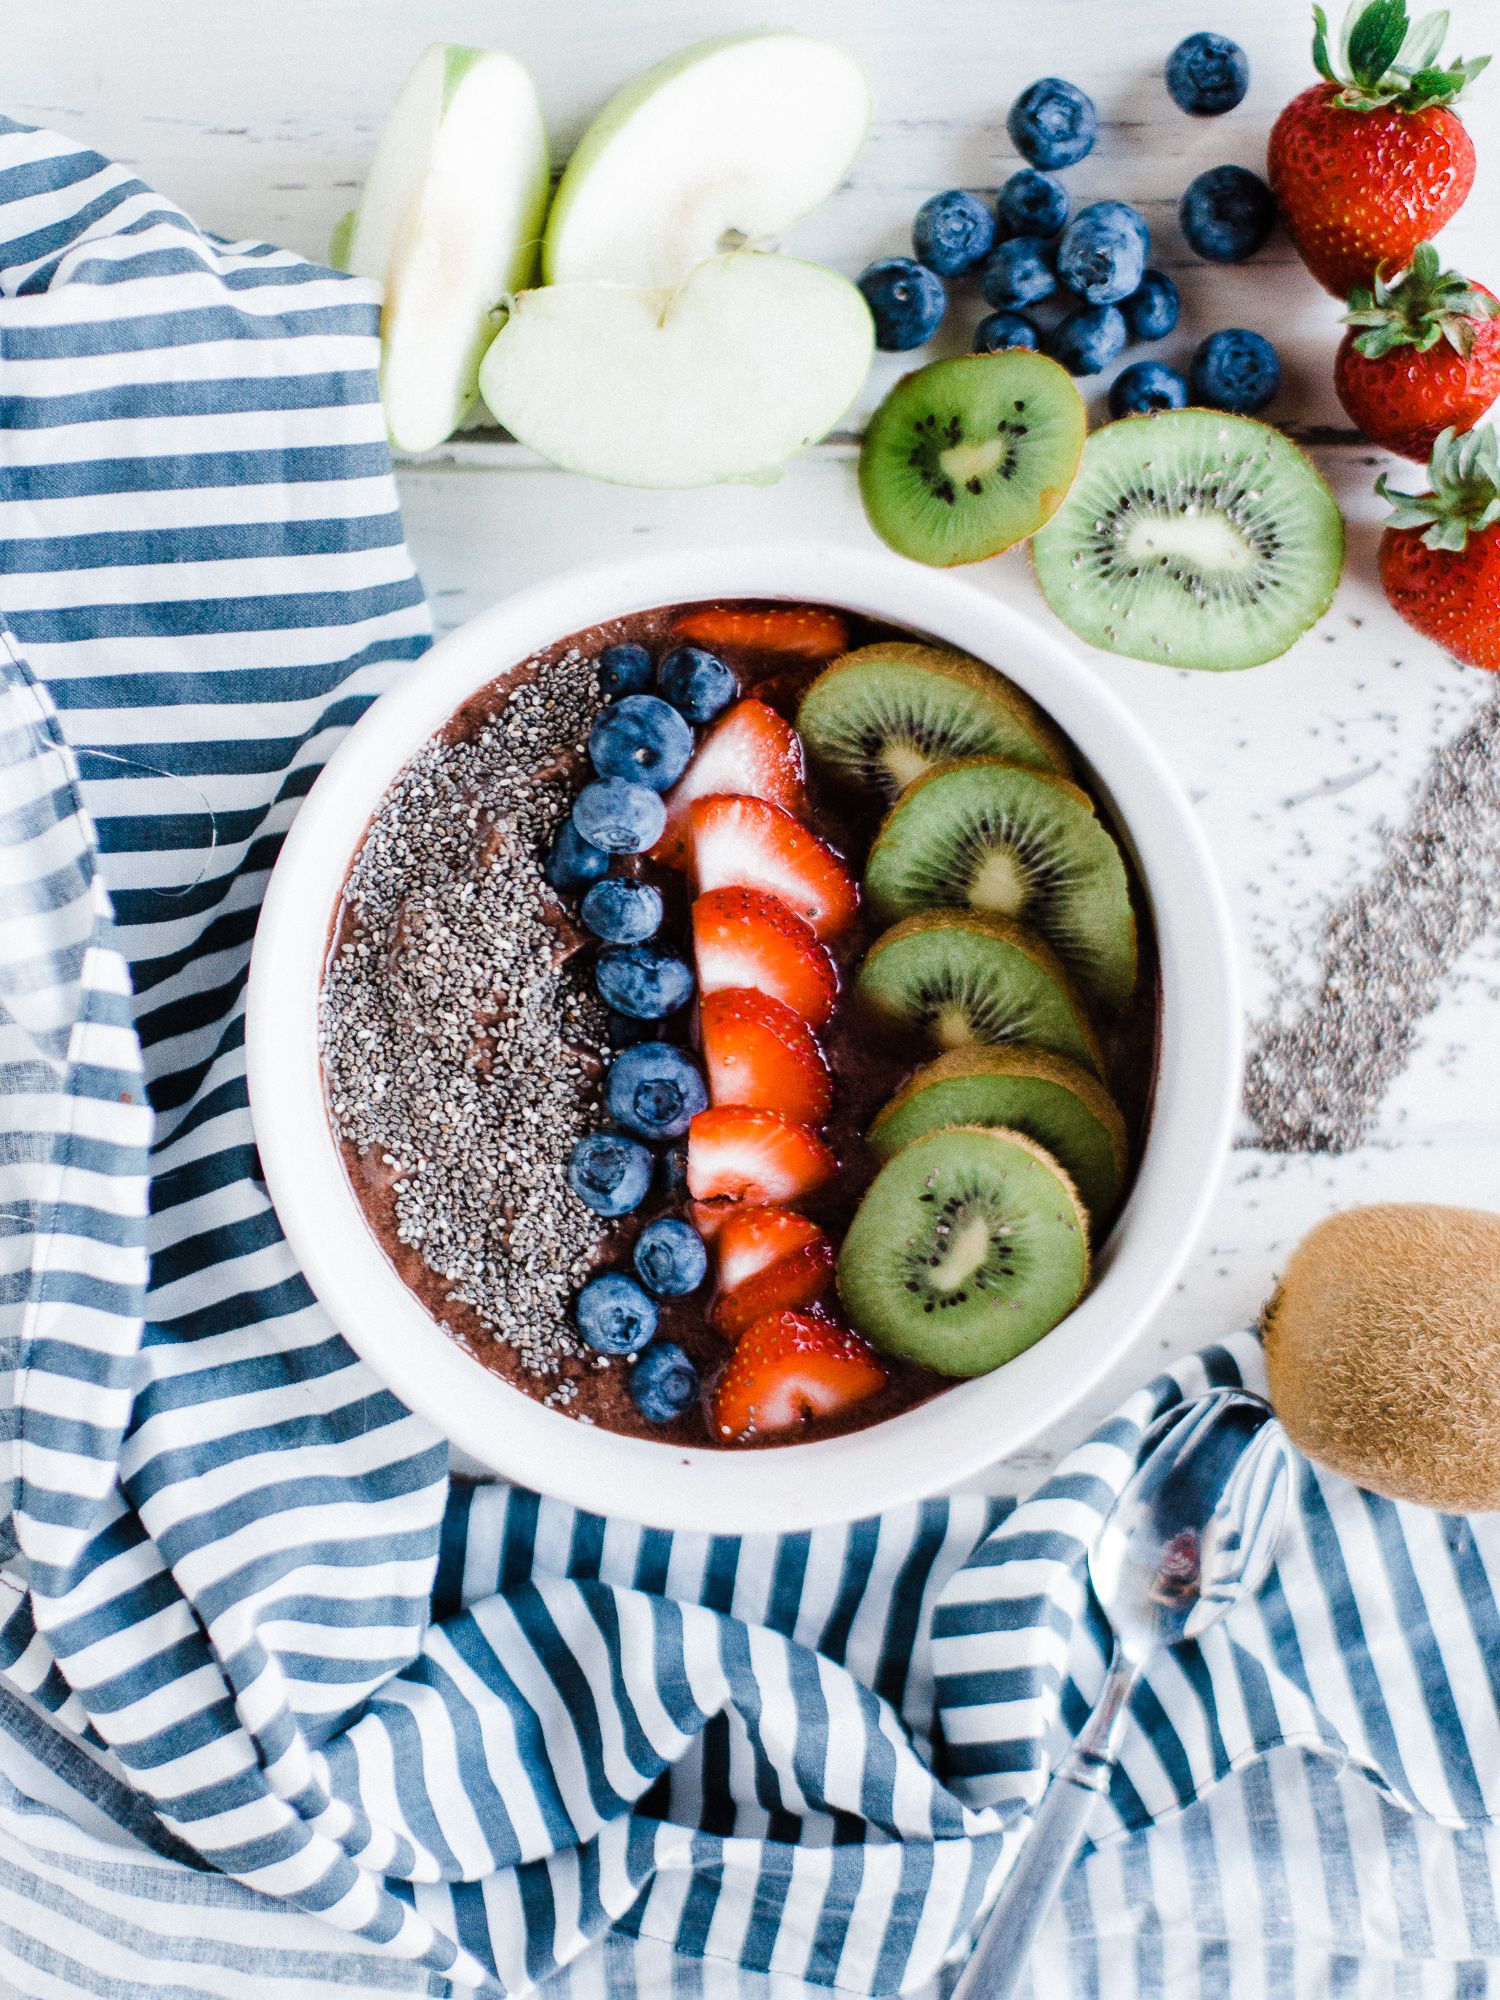 Easy Acai Smoothie Bowl Recipe - Love to be in the Kitchen